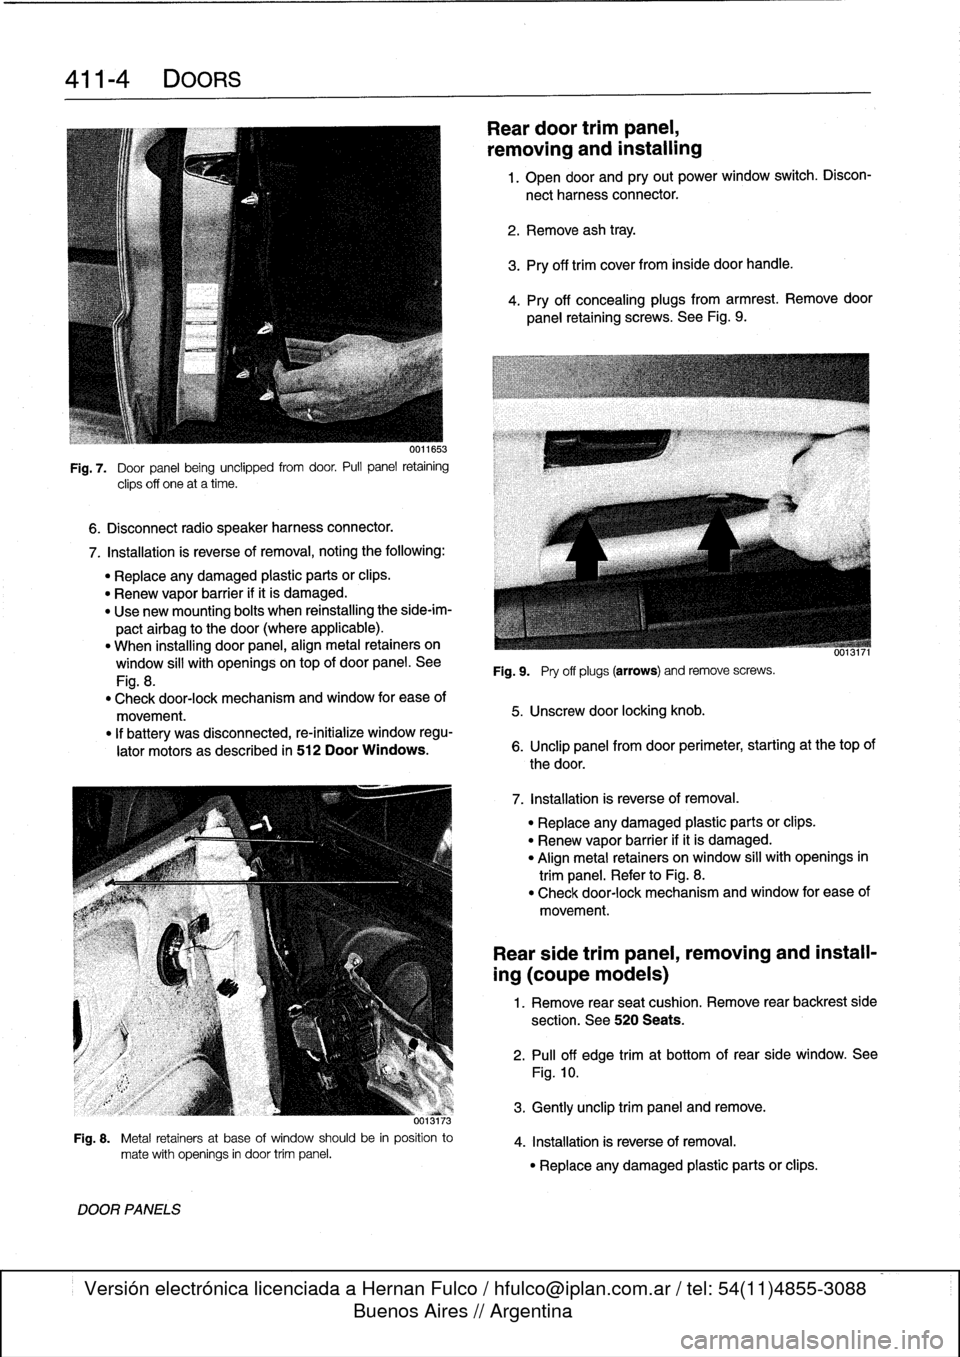 BMW M3 1996 E36 Workshop Manual 
411-
4
DOORS

6
.
Disconnect
radio
speaker
harness
connector
.

Fig
.
7
.

	

Door
panel
being
unclipped
from
door
.
Pull
panel
retaining

clips
off
one
at
a
time
.

7
.
Installation
is
reverse
of
re